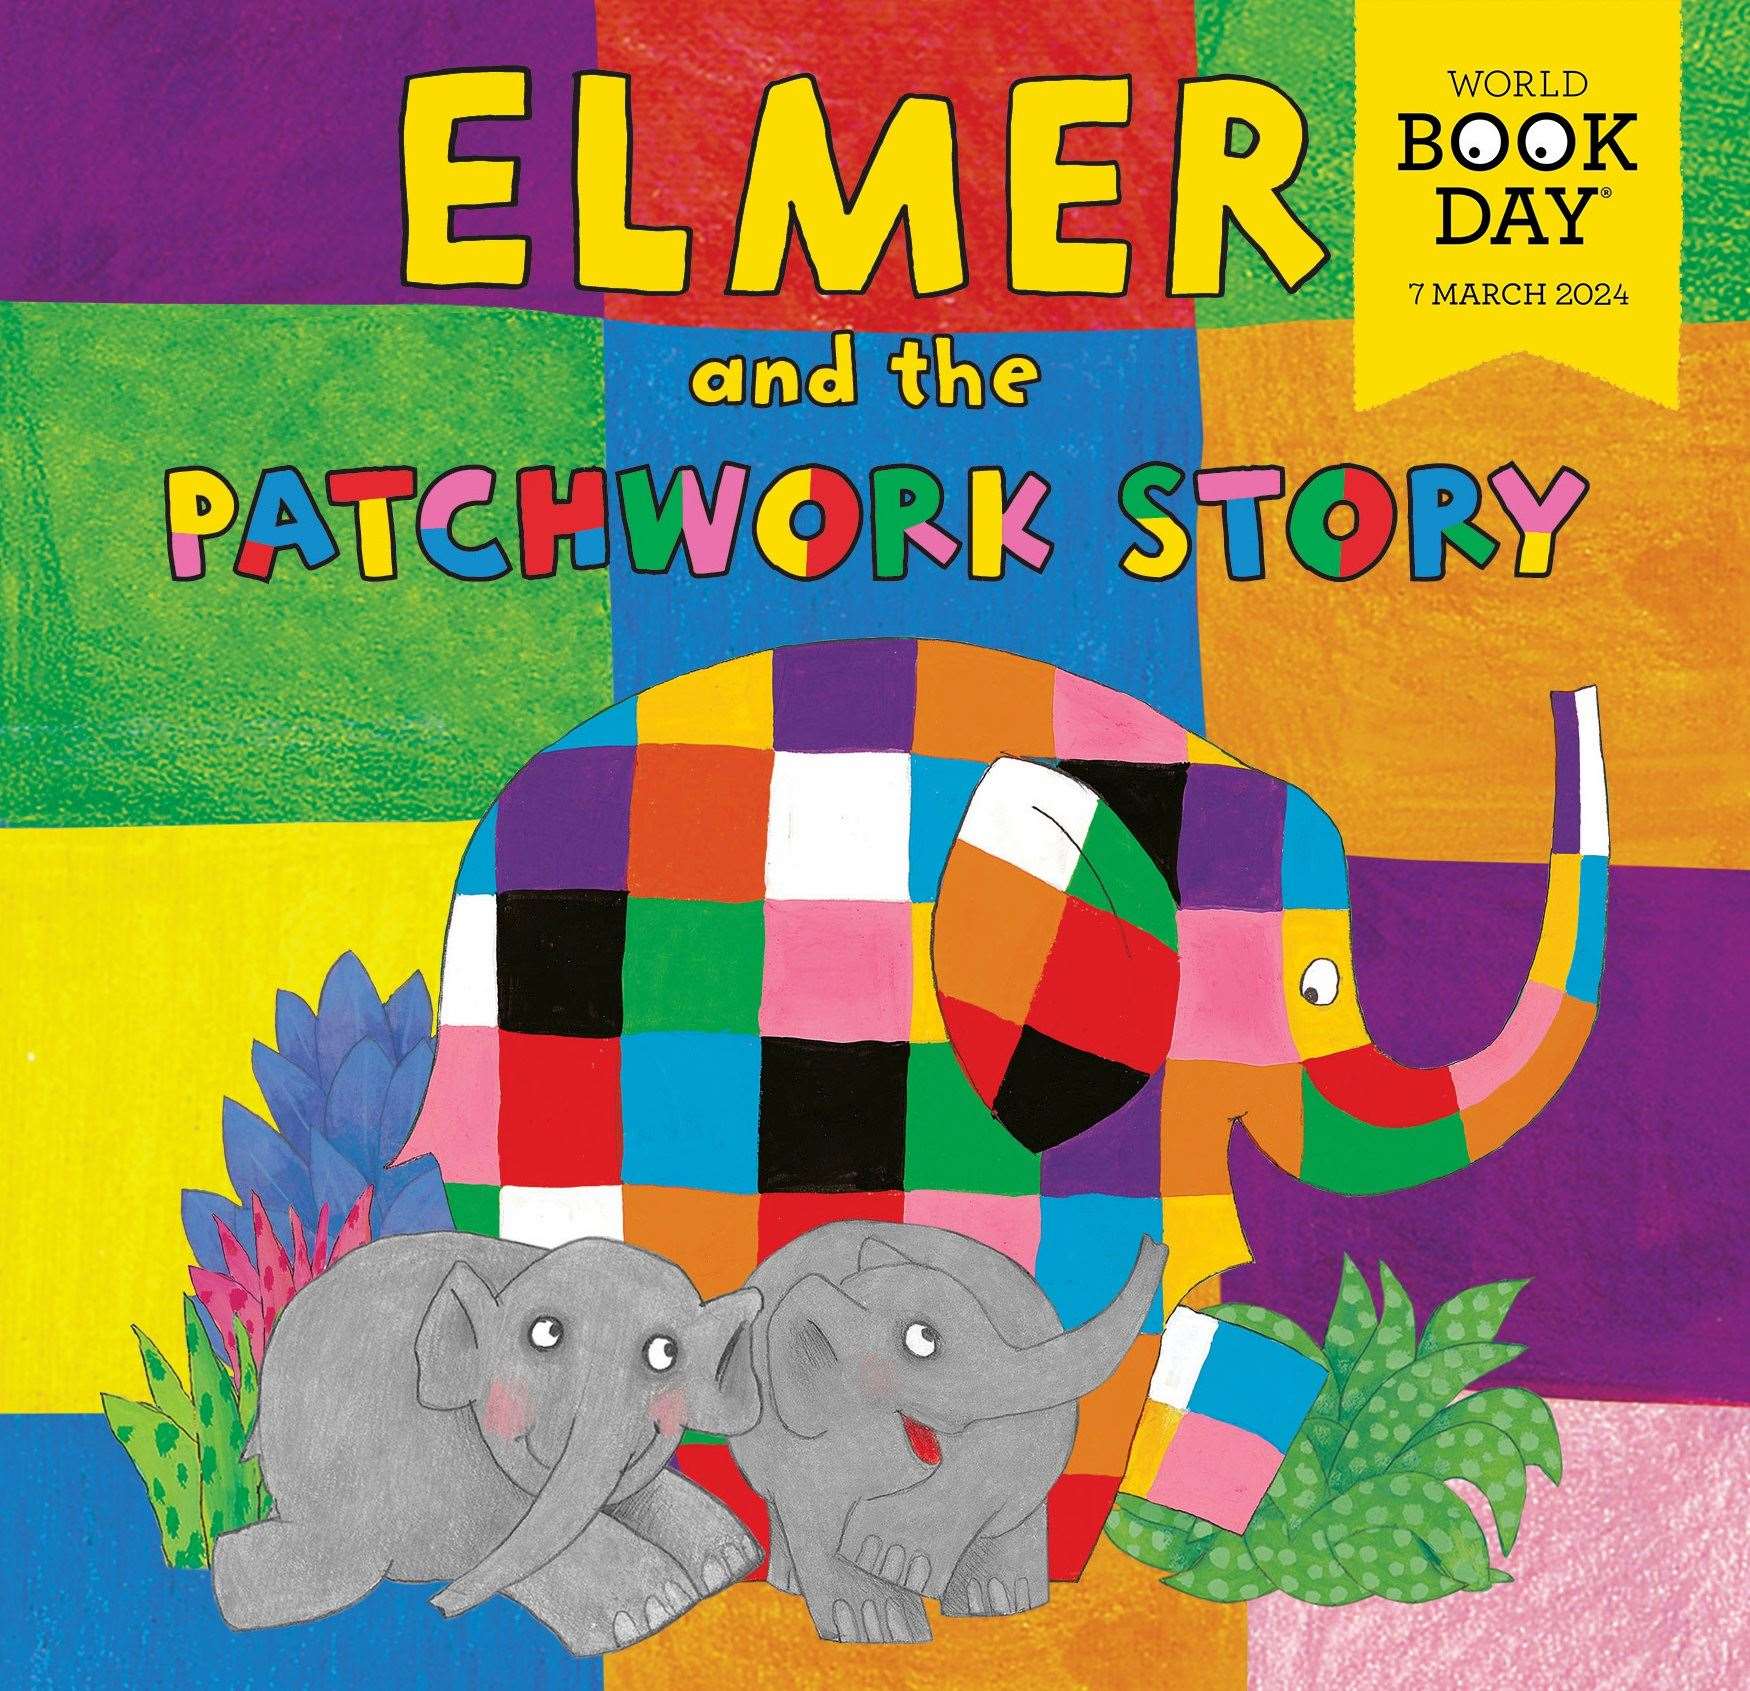 Children’s favourite Elmer is among the options